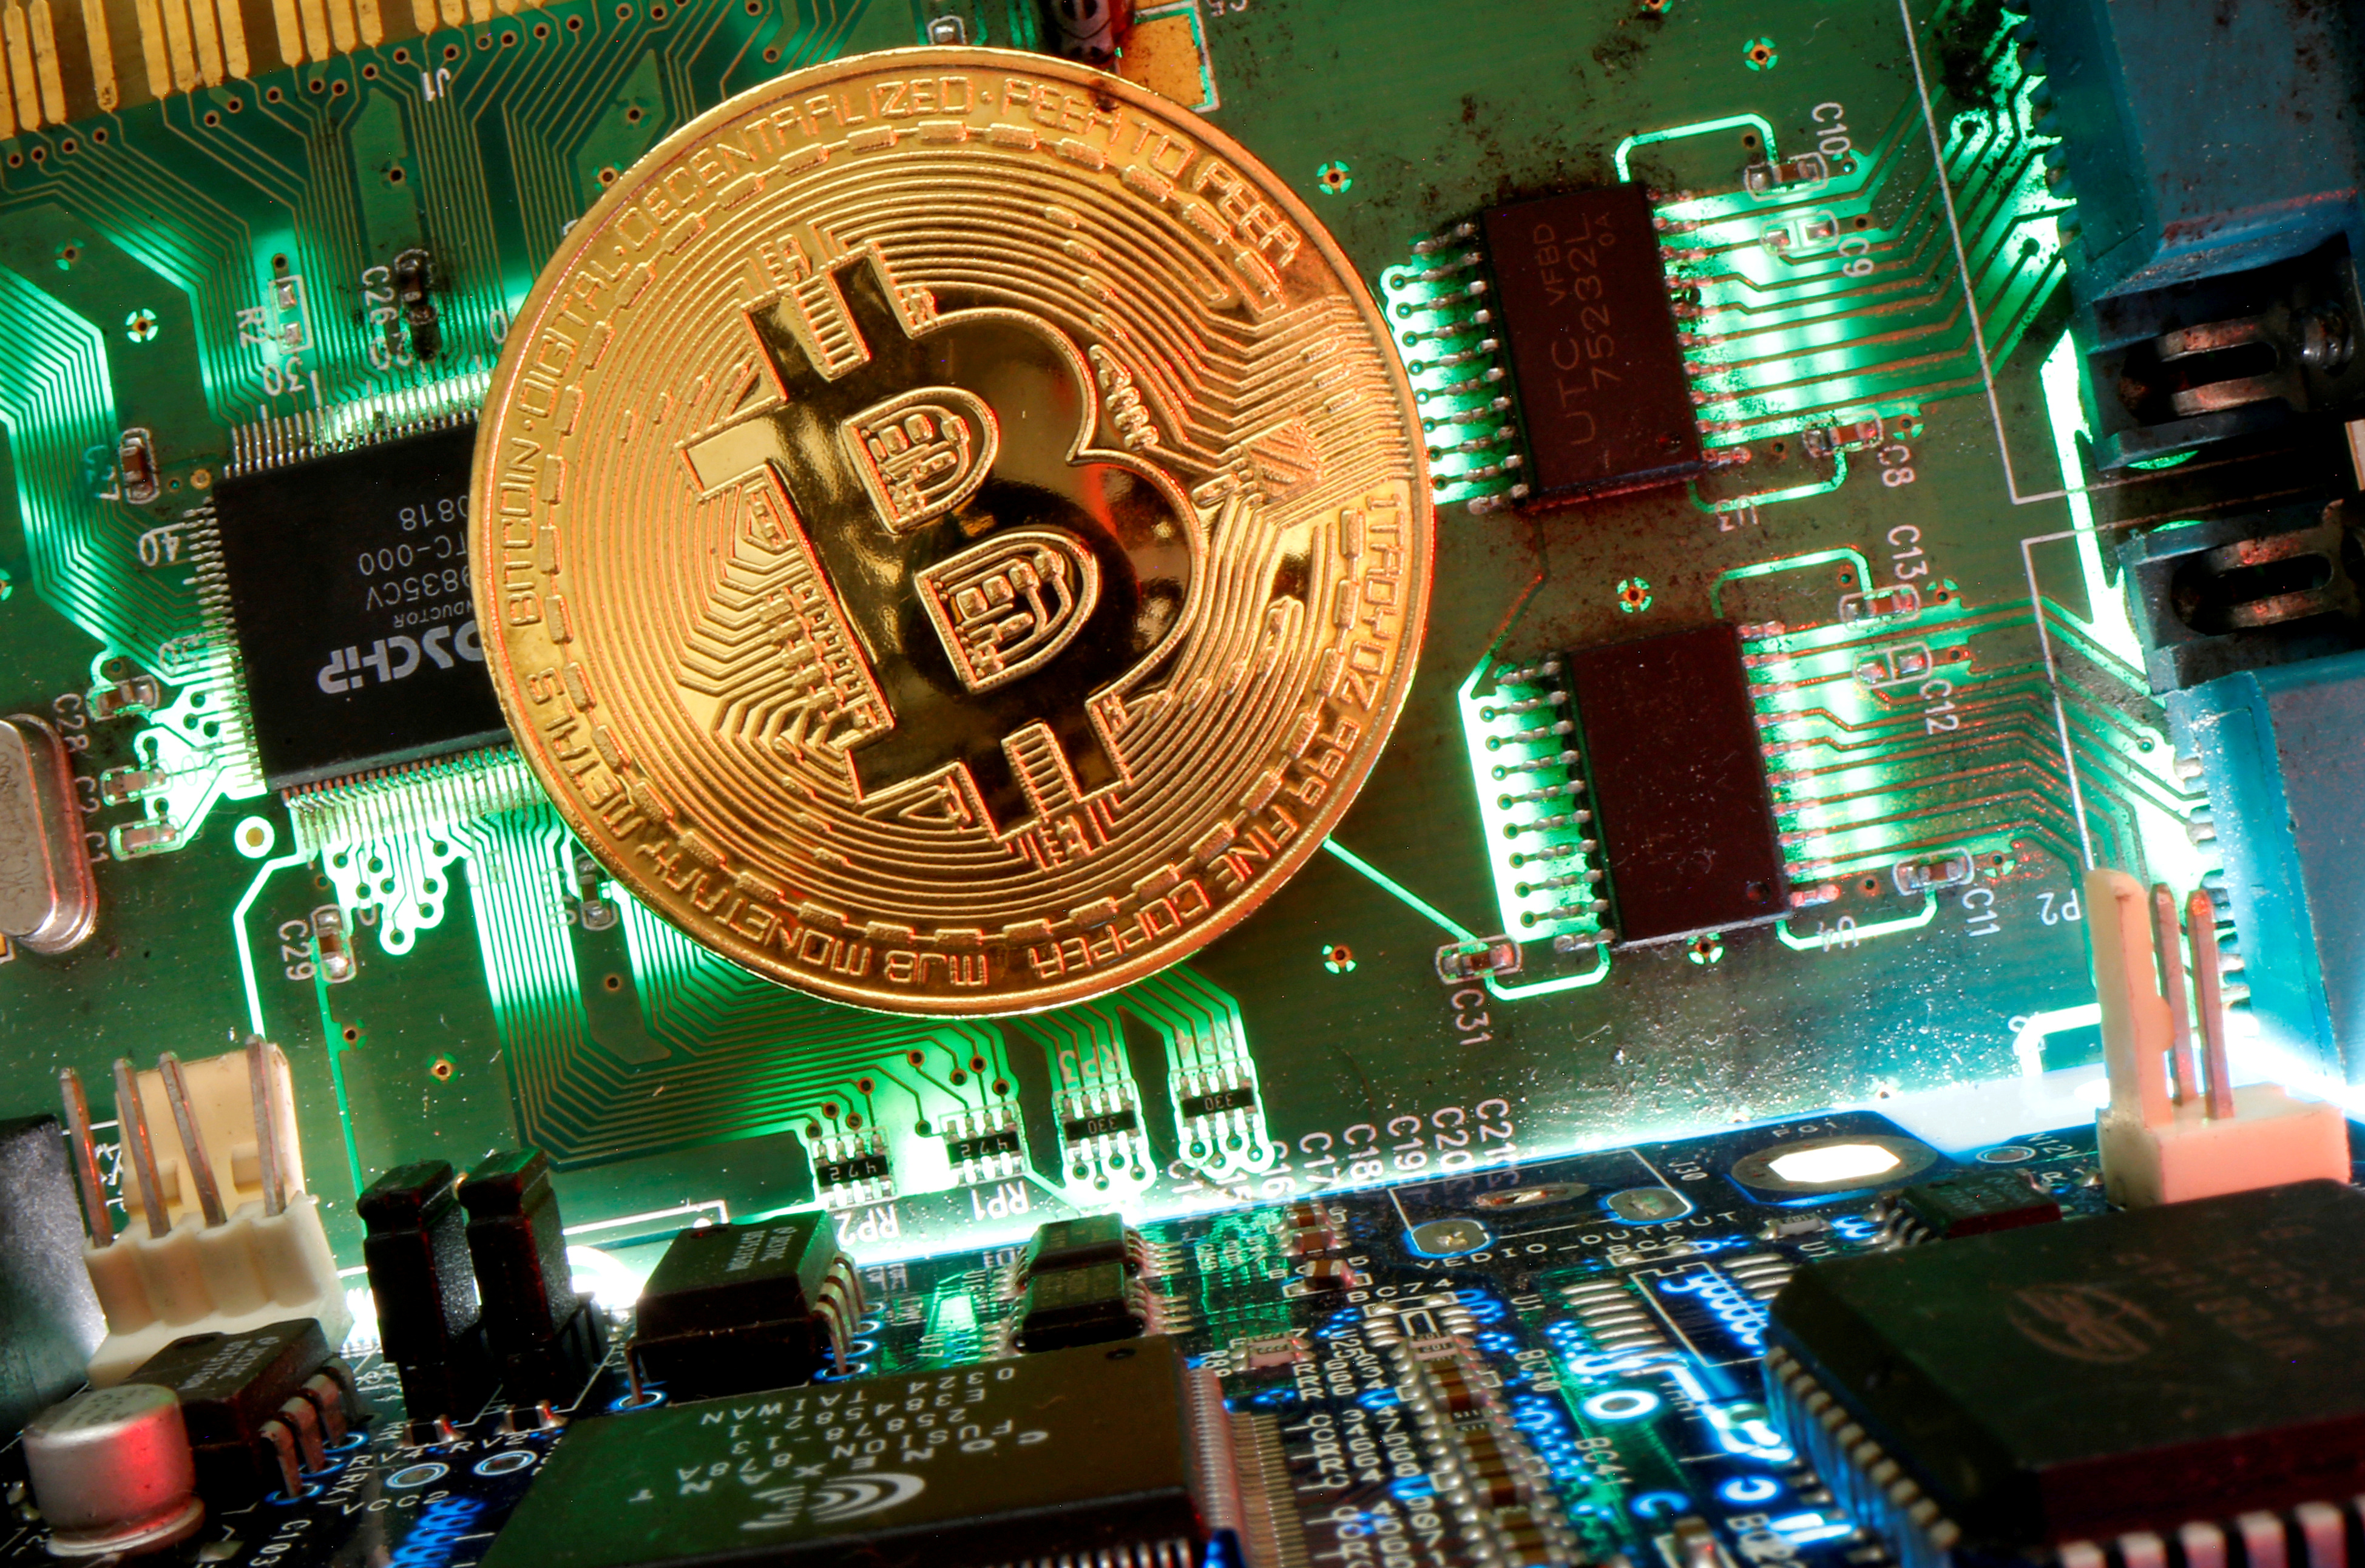 Representation of the virtual currency Bitcoin is seen on a motherboard in this picture illustration